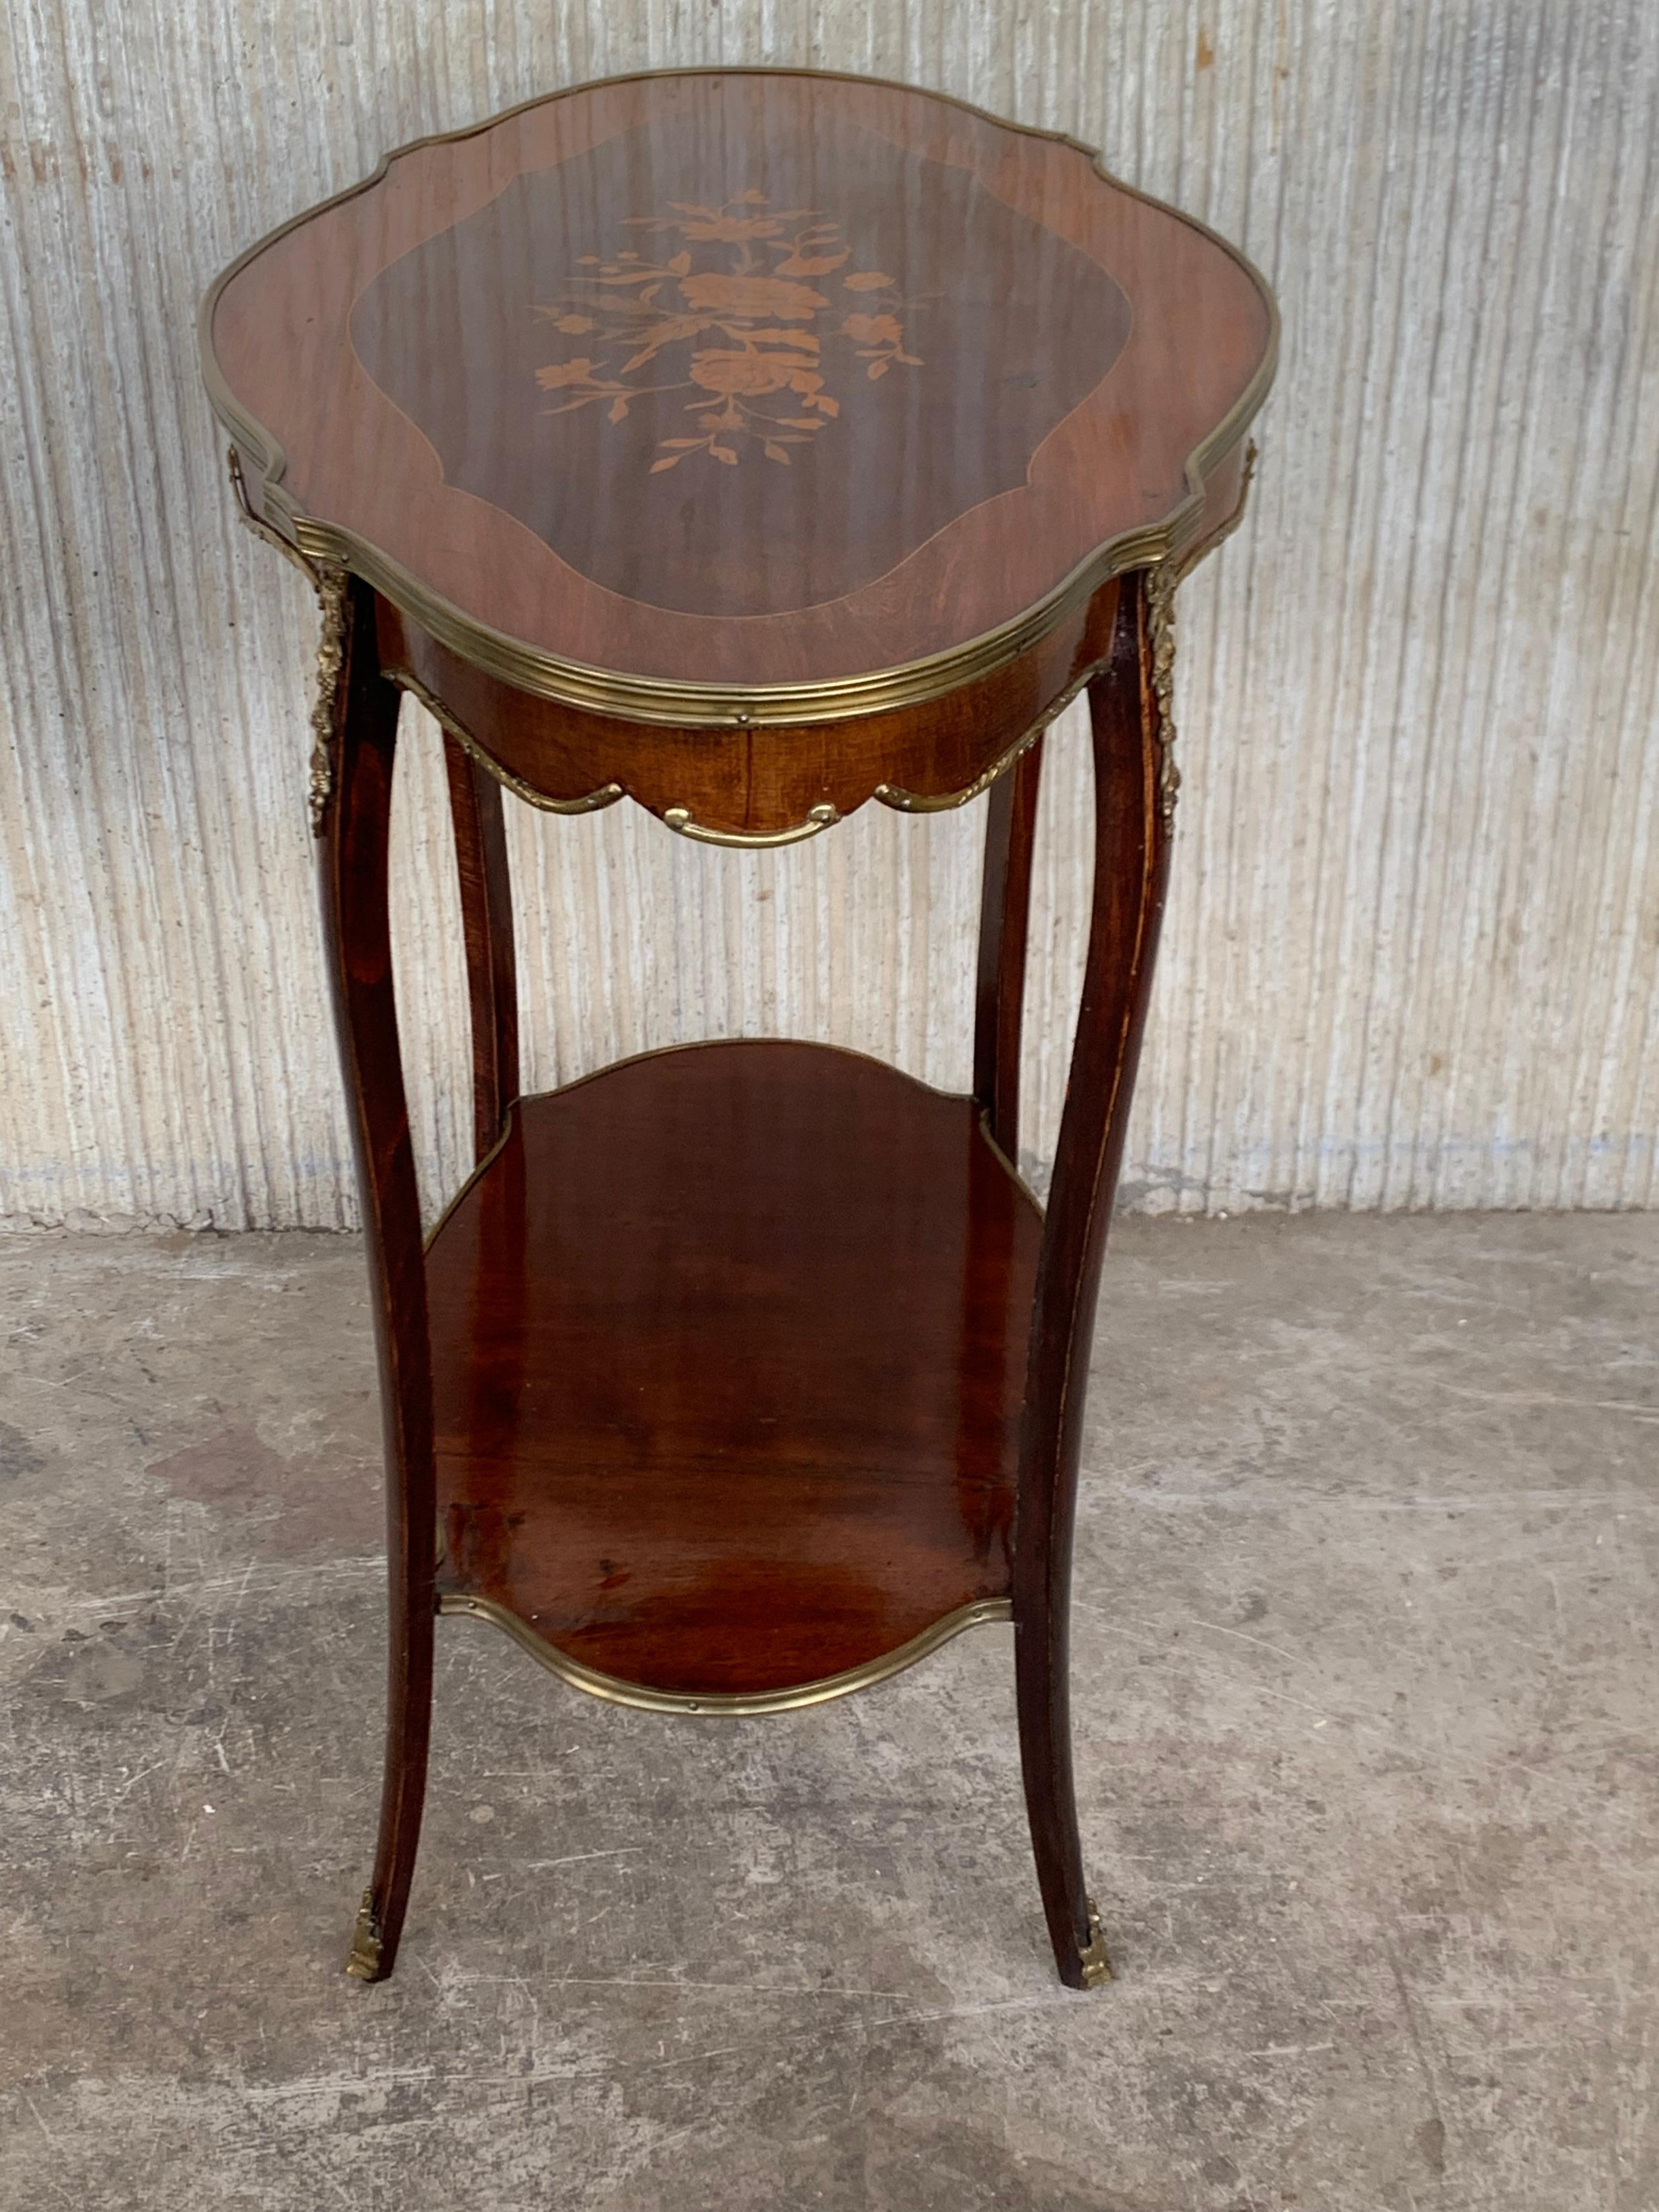 French 19th Century Table Louis XV Style with Floral Marquetry and Gilt Bronze In Good Condition For Sale In Miami, FL